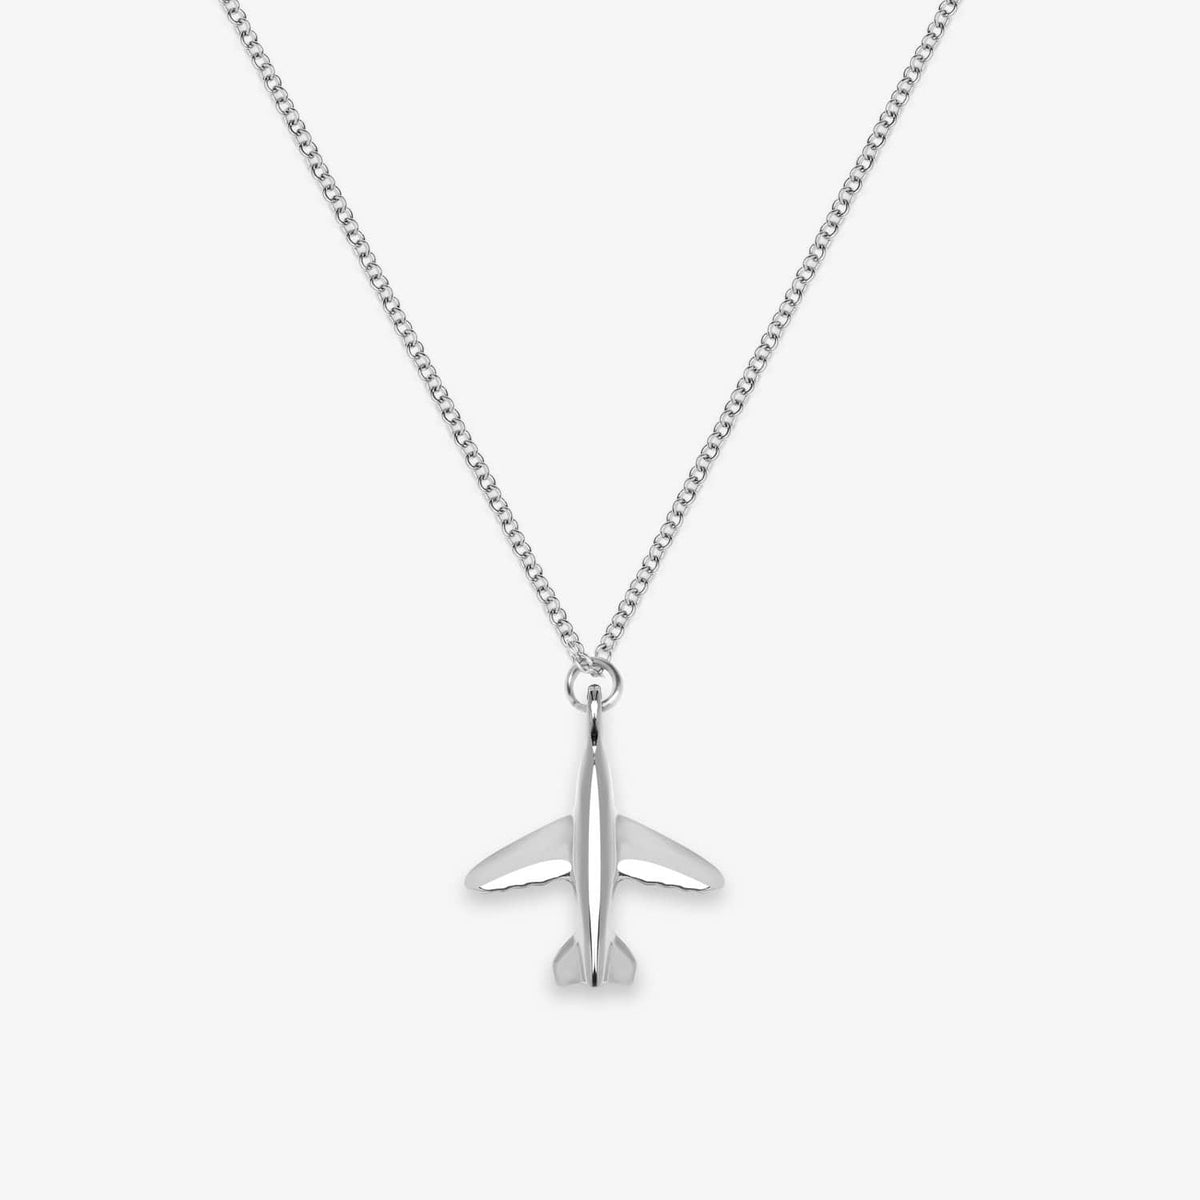 The Wander Club Airplane Necklace